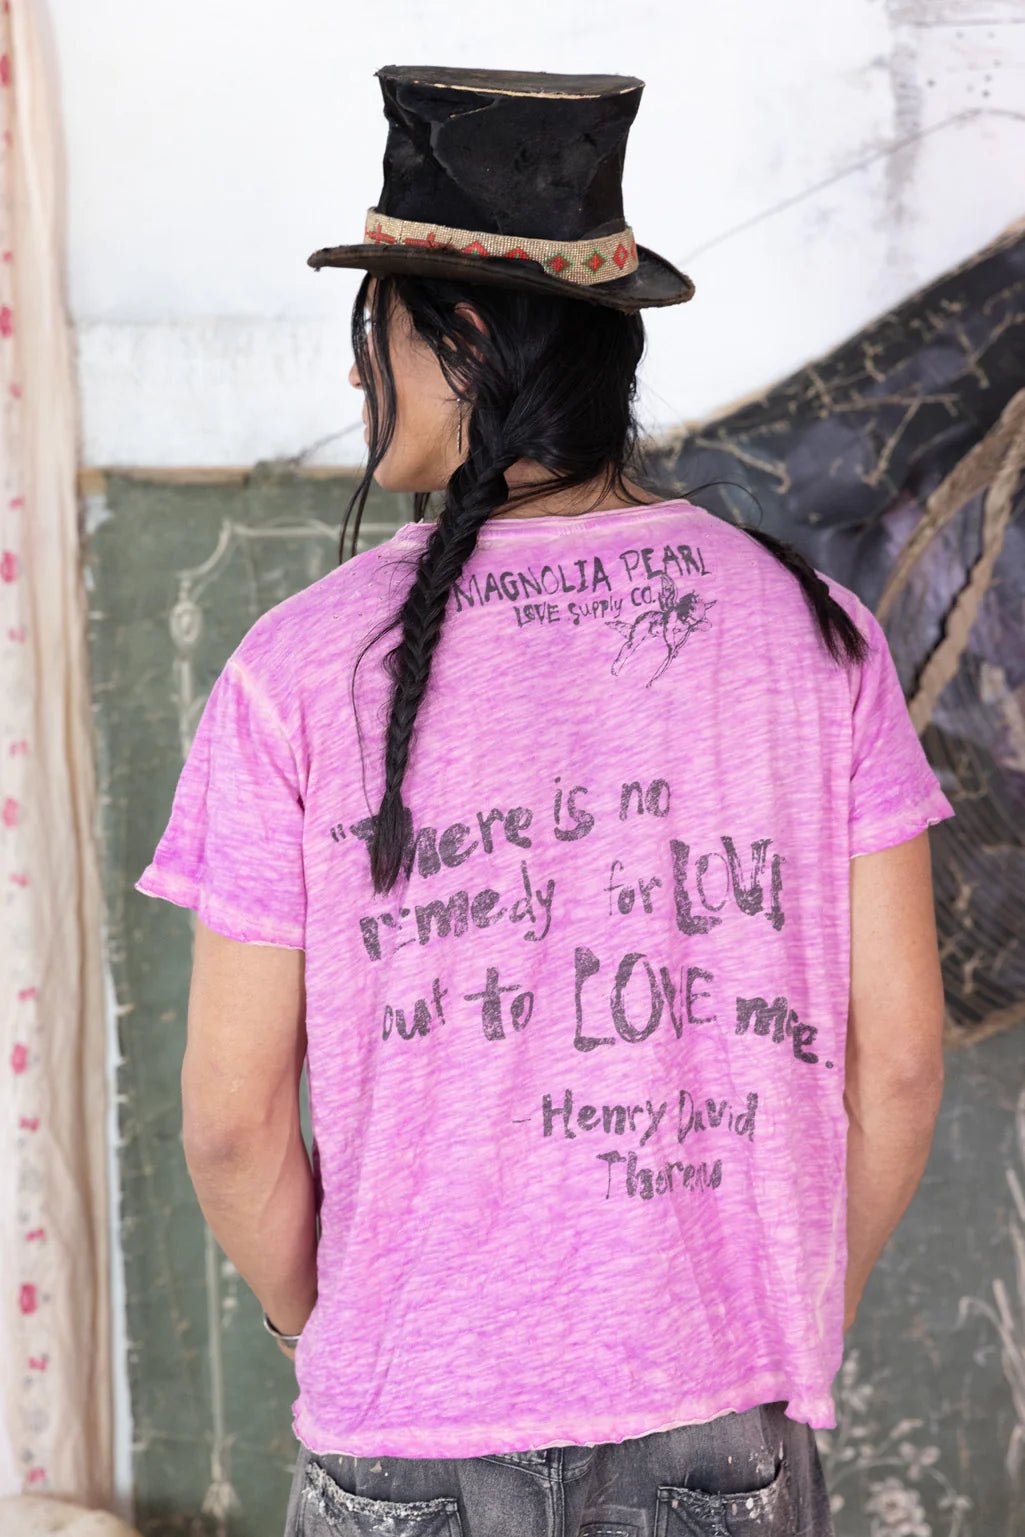 Love Is The Remedy T Top 1666 - AlliumMagnolia PearlShirts & Tops